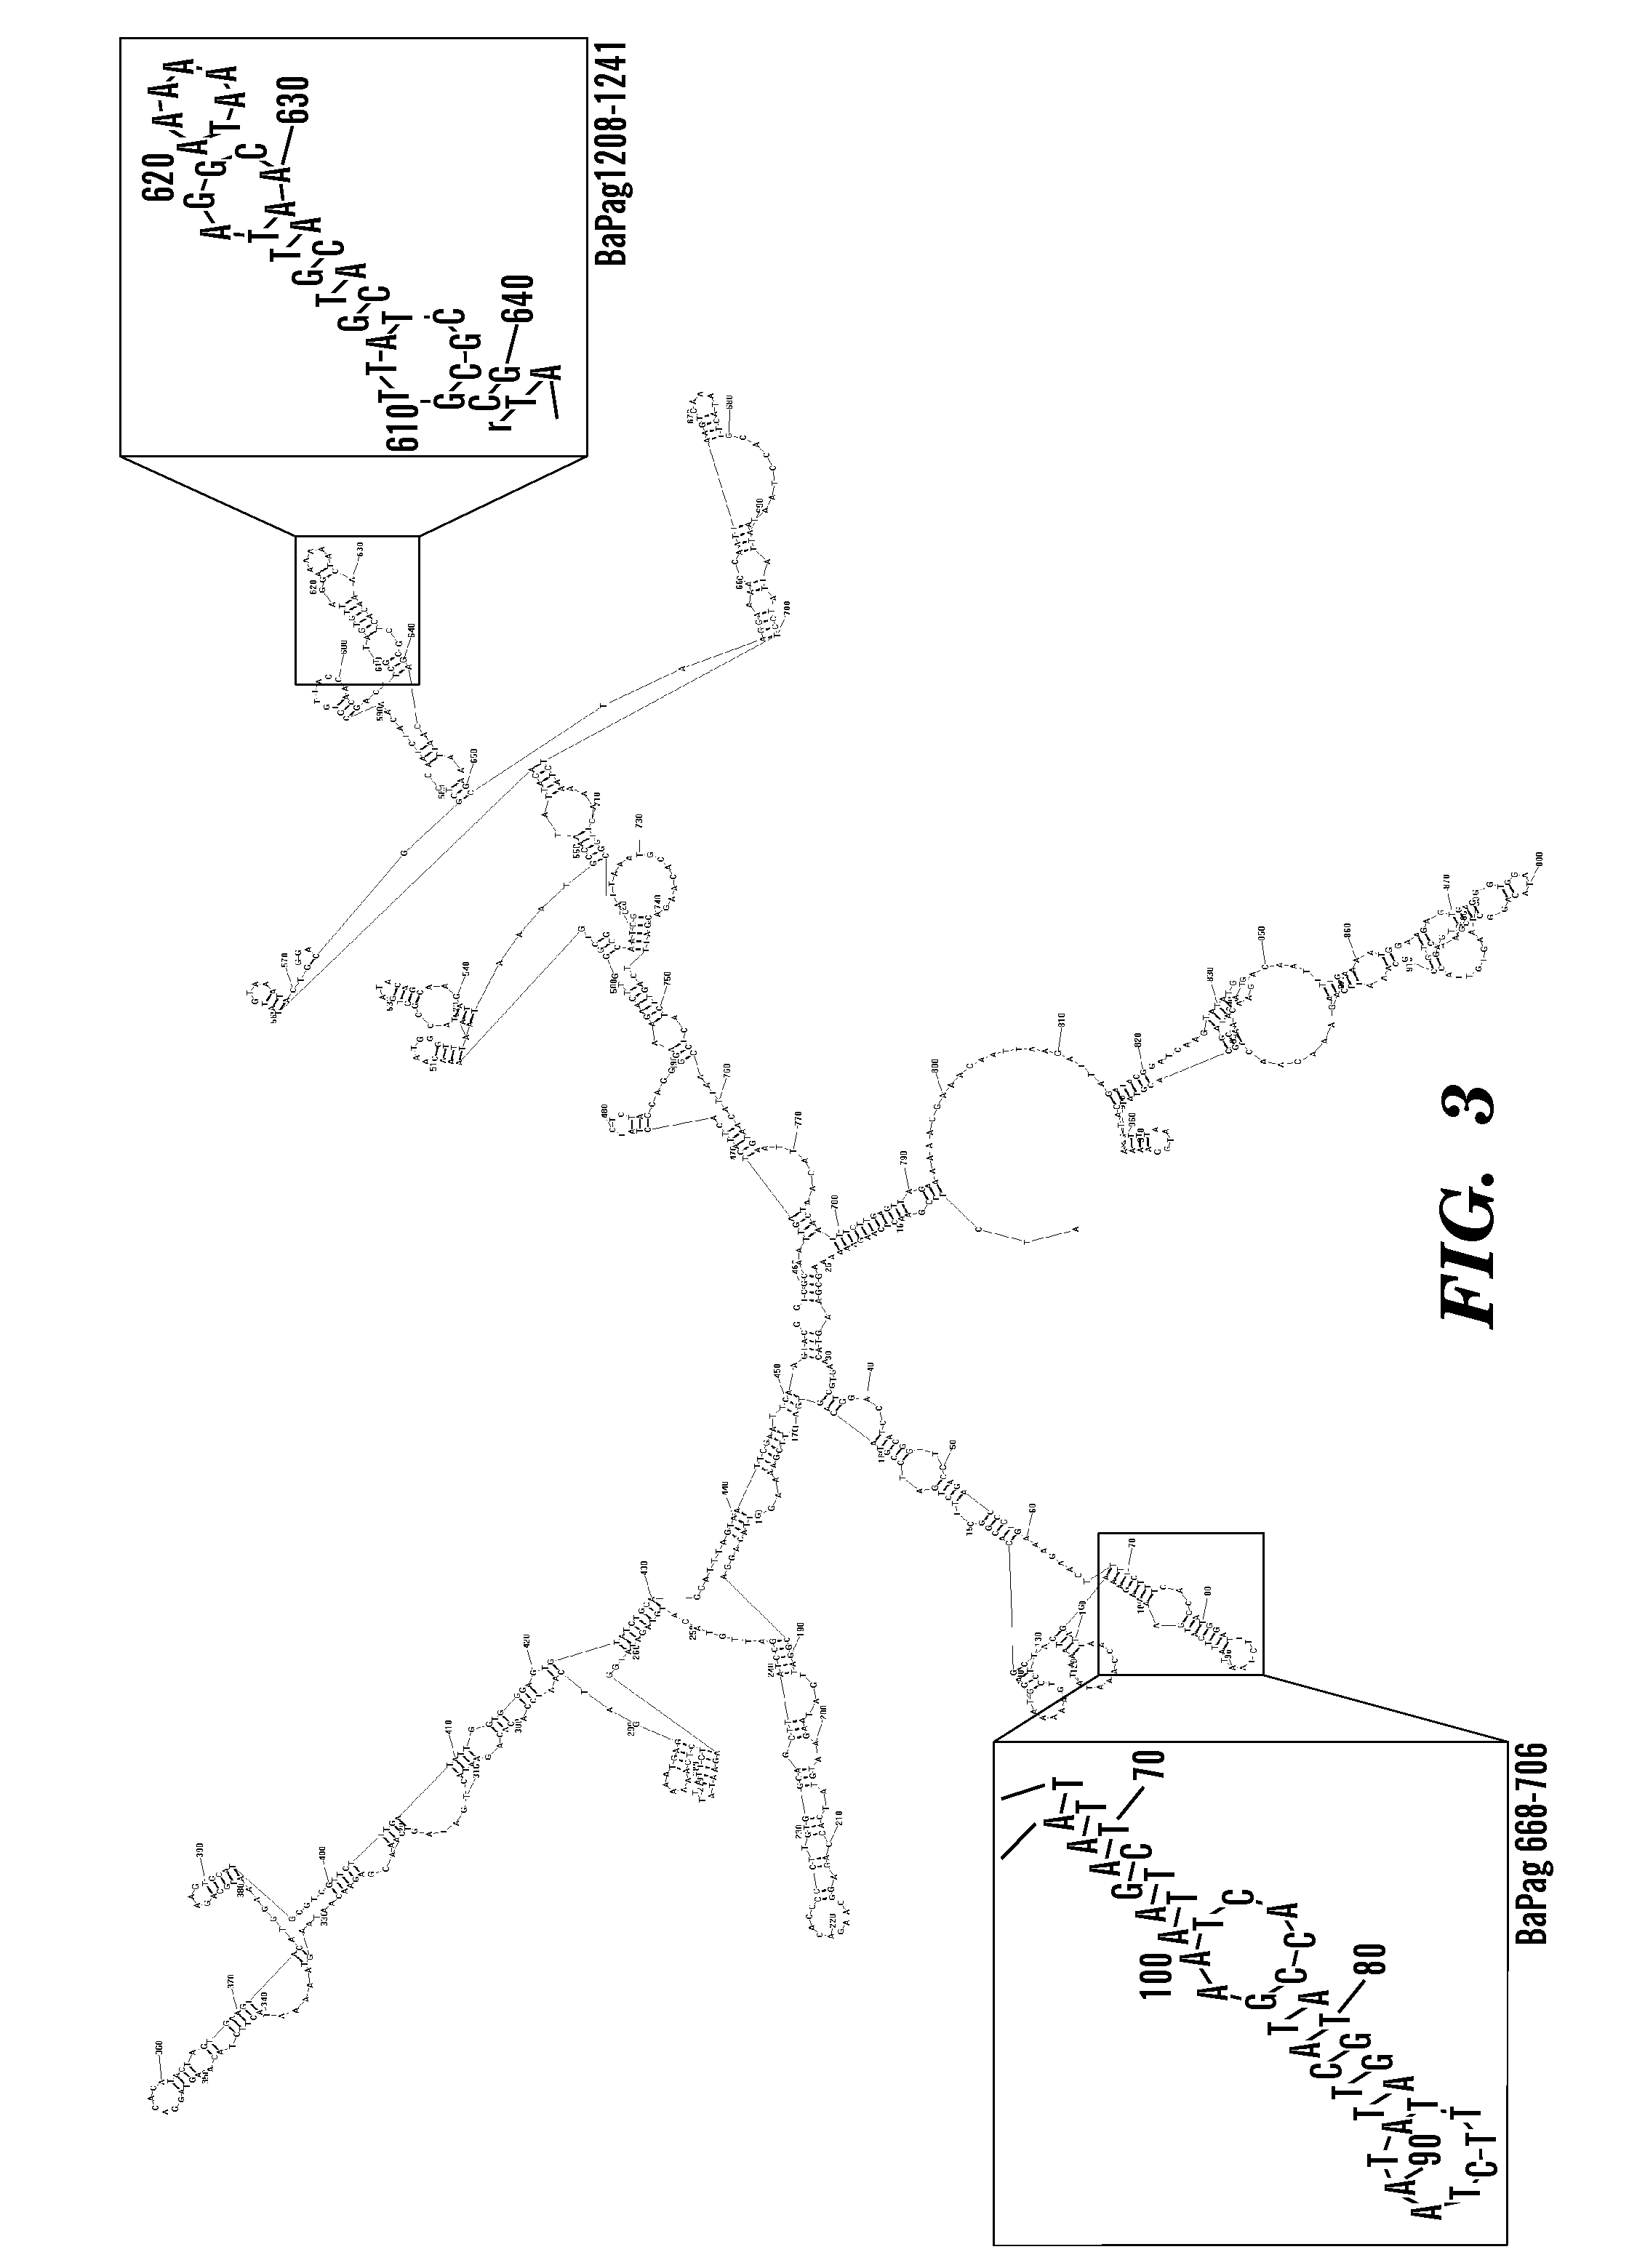 Method of identifying hairpin DNA probes by partial fold analysis